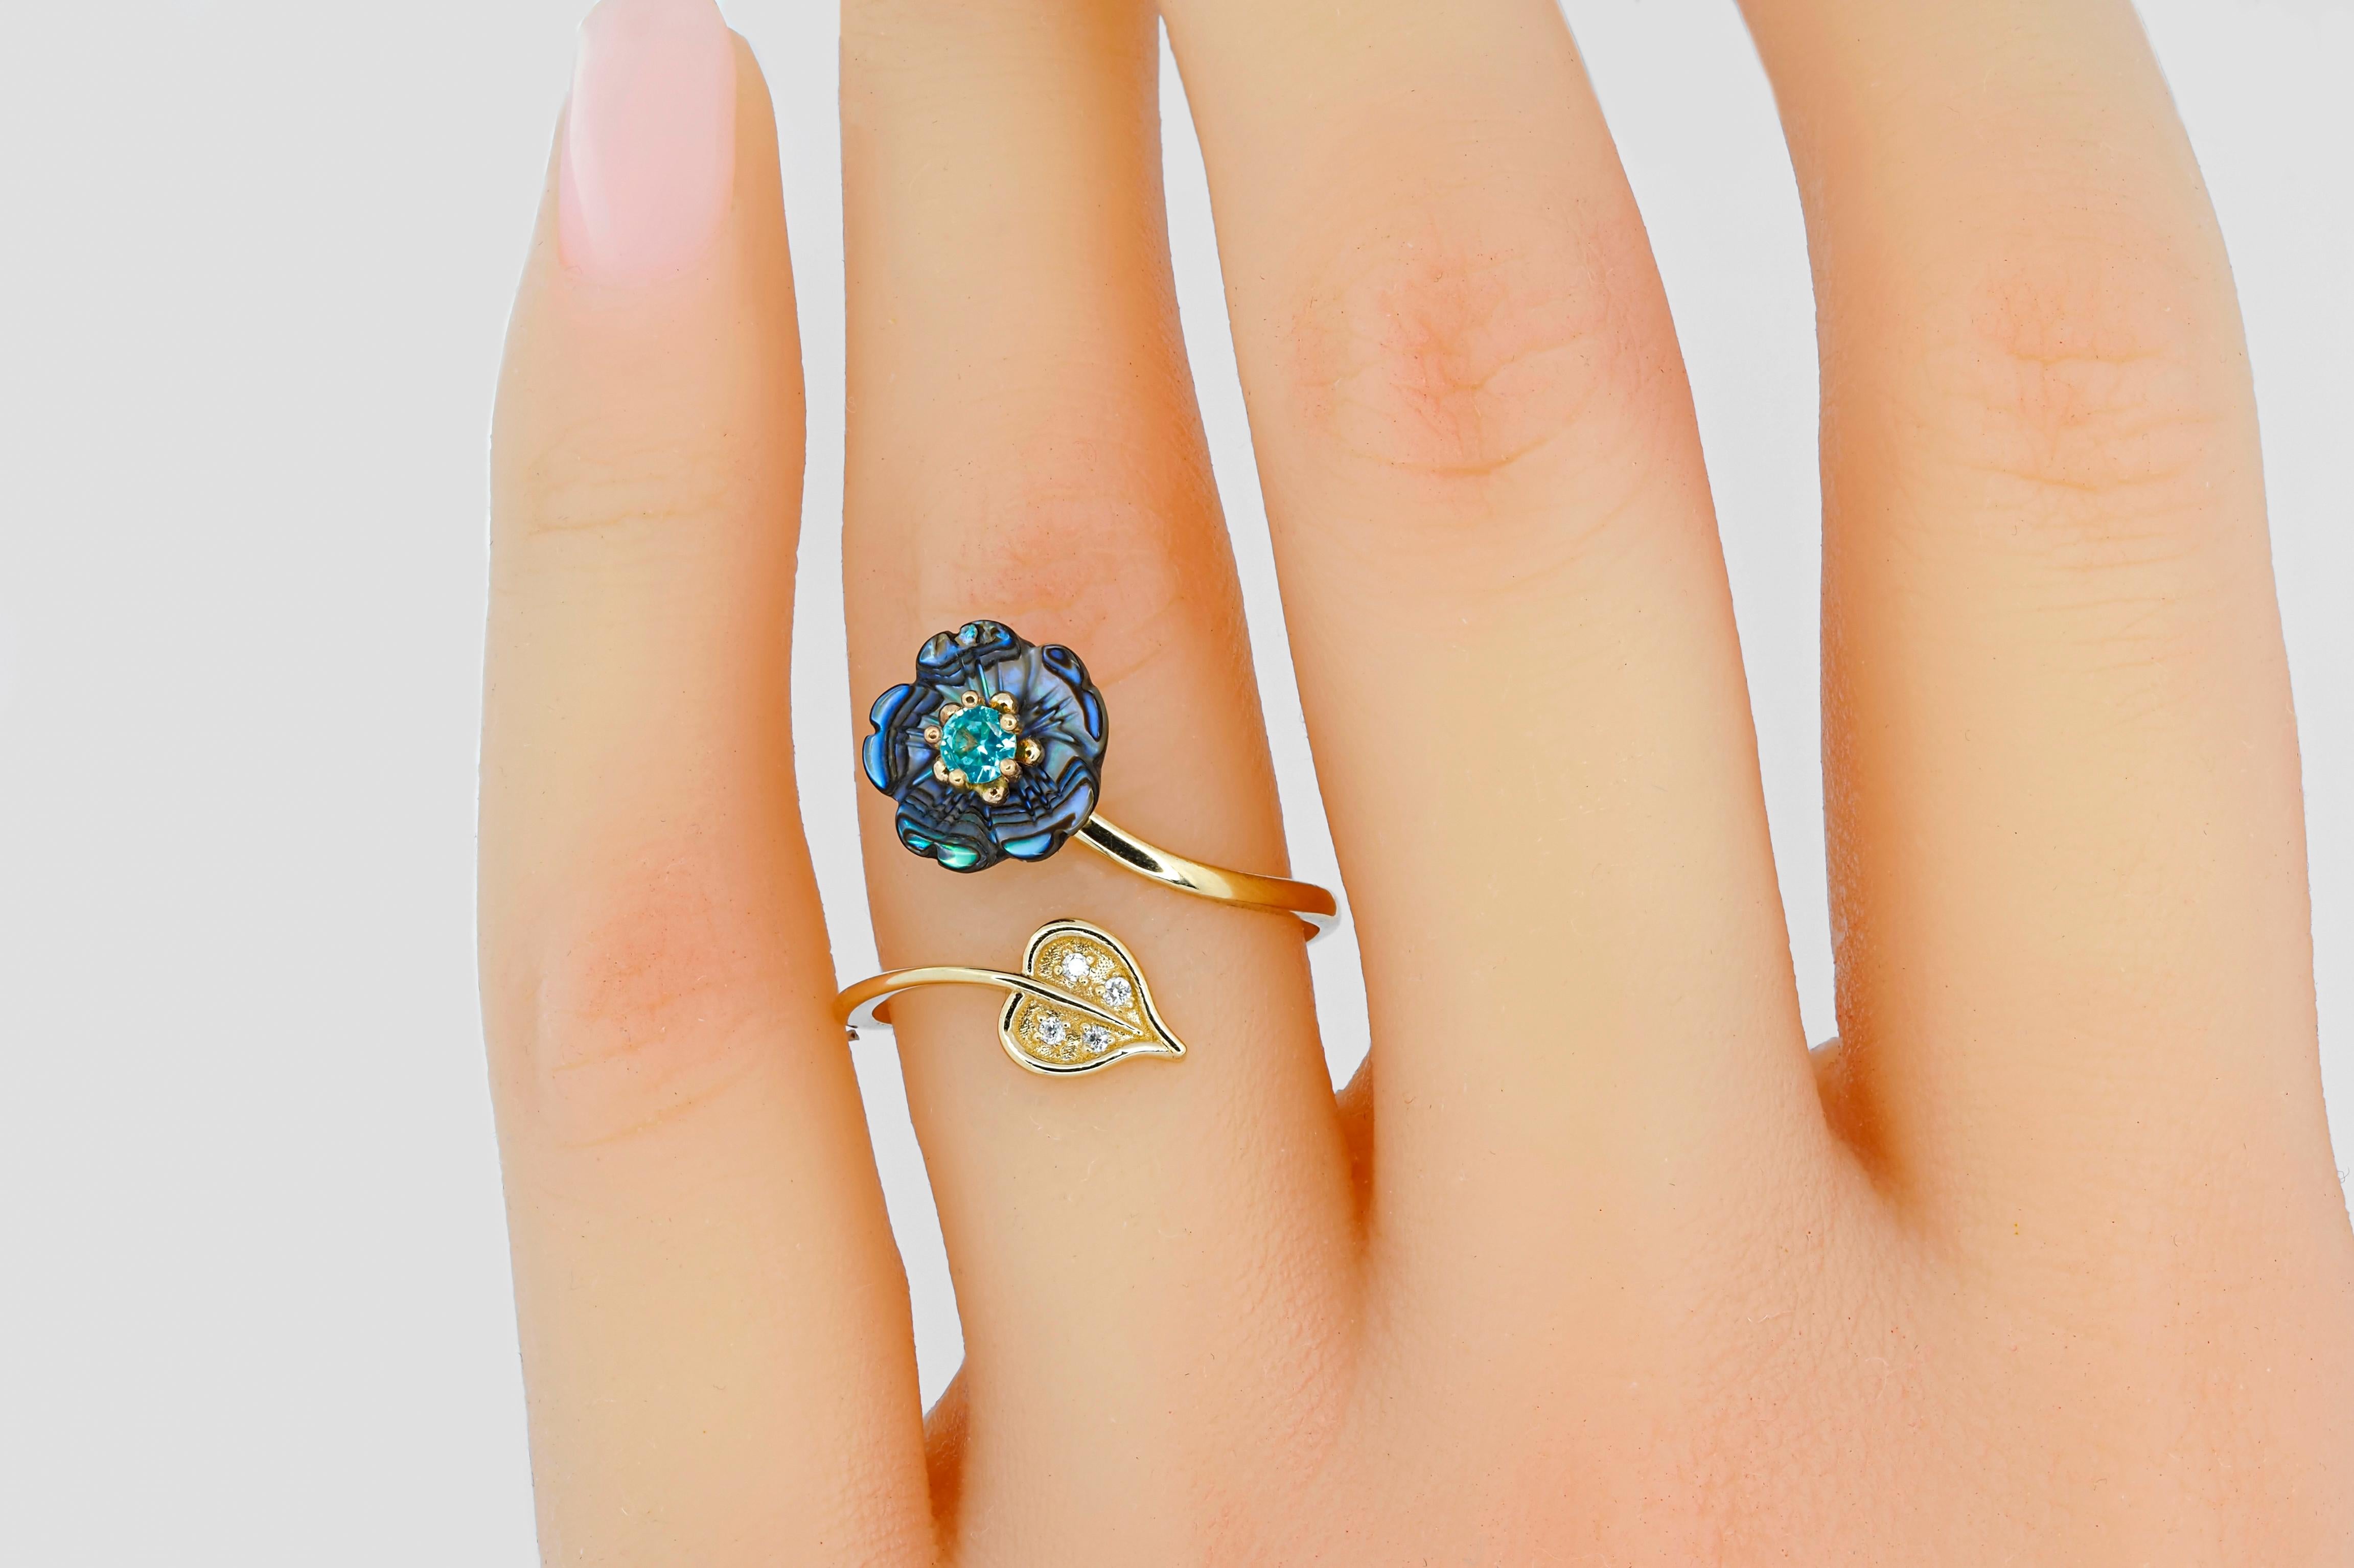 Paraiba gold ring. Round paraiba ring. Blue gemstone ring. Open ended ring. Carved mother of pearl flower ring. Flower gold ring. Adjustable gold ring. Black flower ring.

Ring has a free size and can be worn with finger size from 17.2 - 18.5